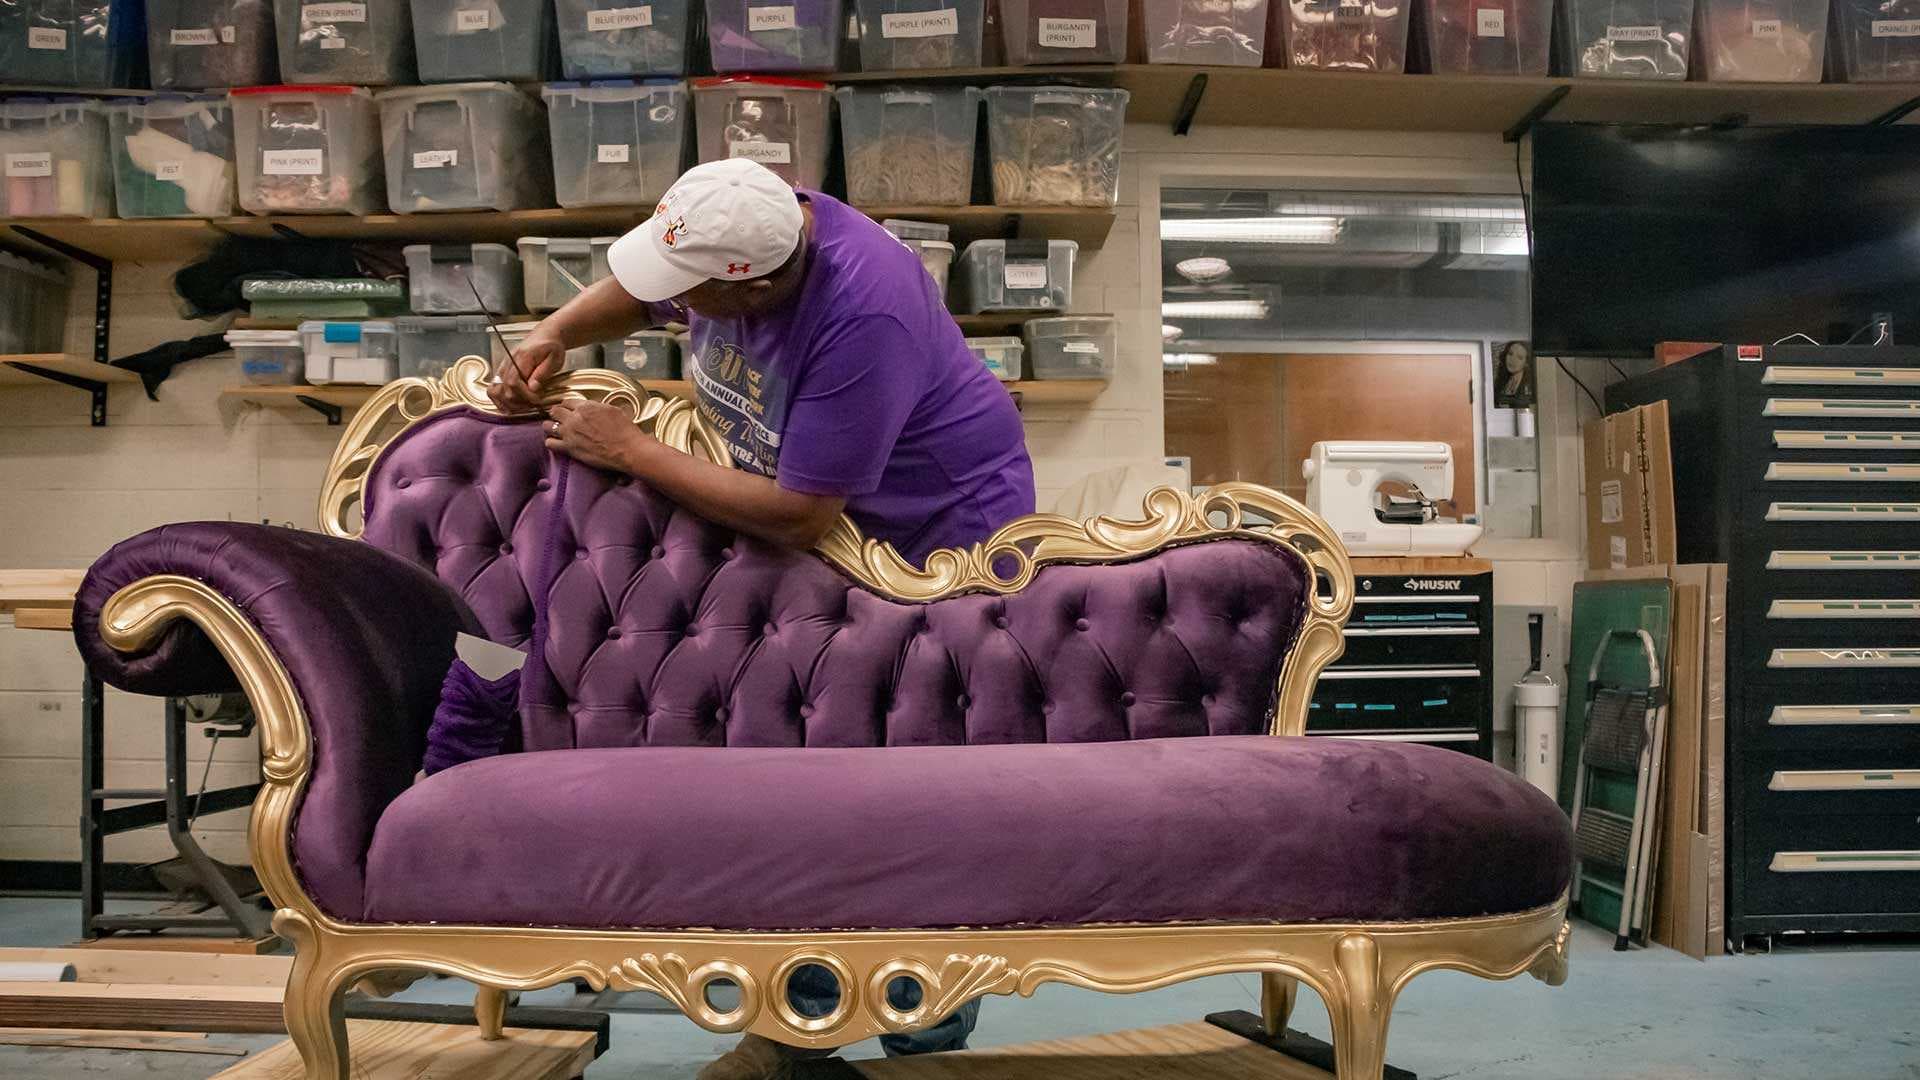 Clarice staff member places trim on purple couch